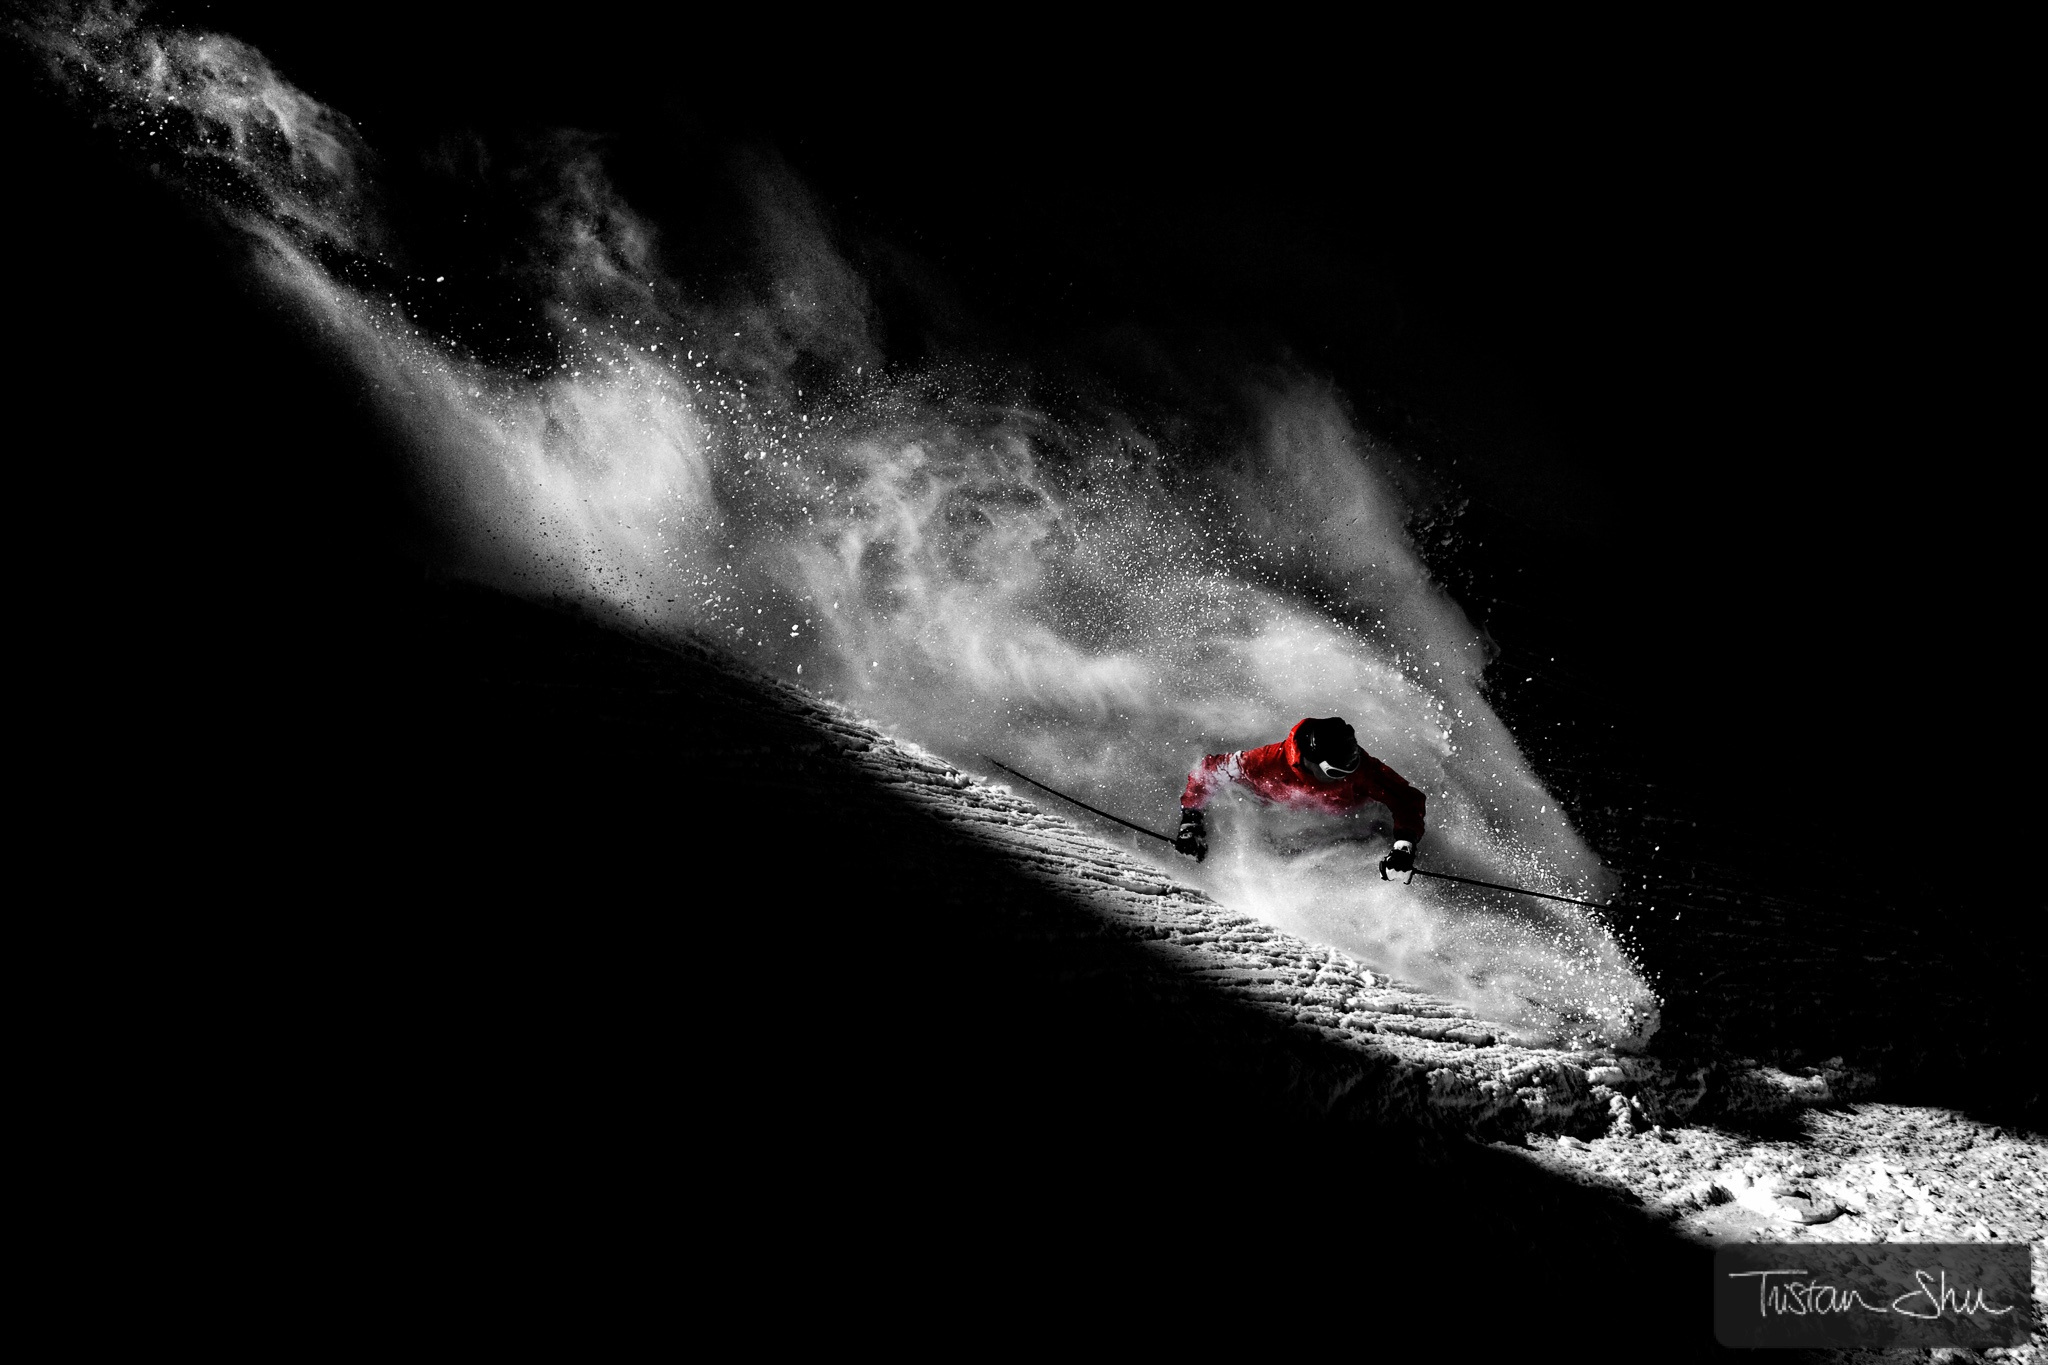 10 Action/Sport Photographers You Need to Follow Right Now